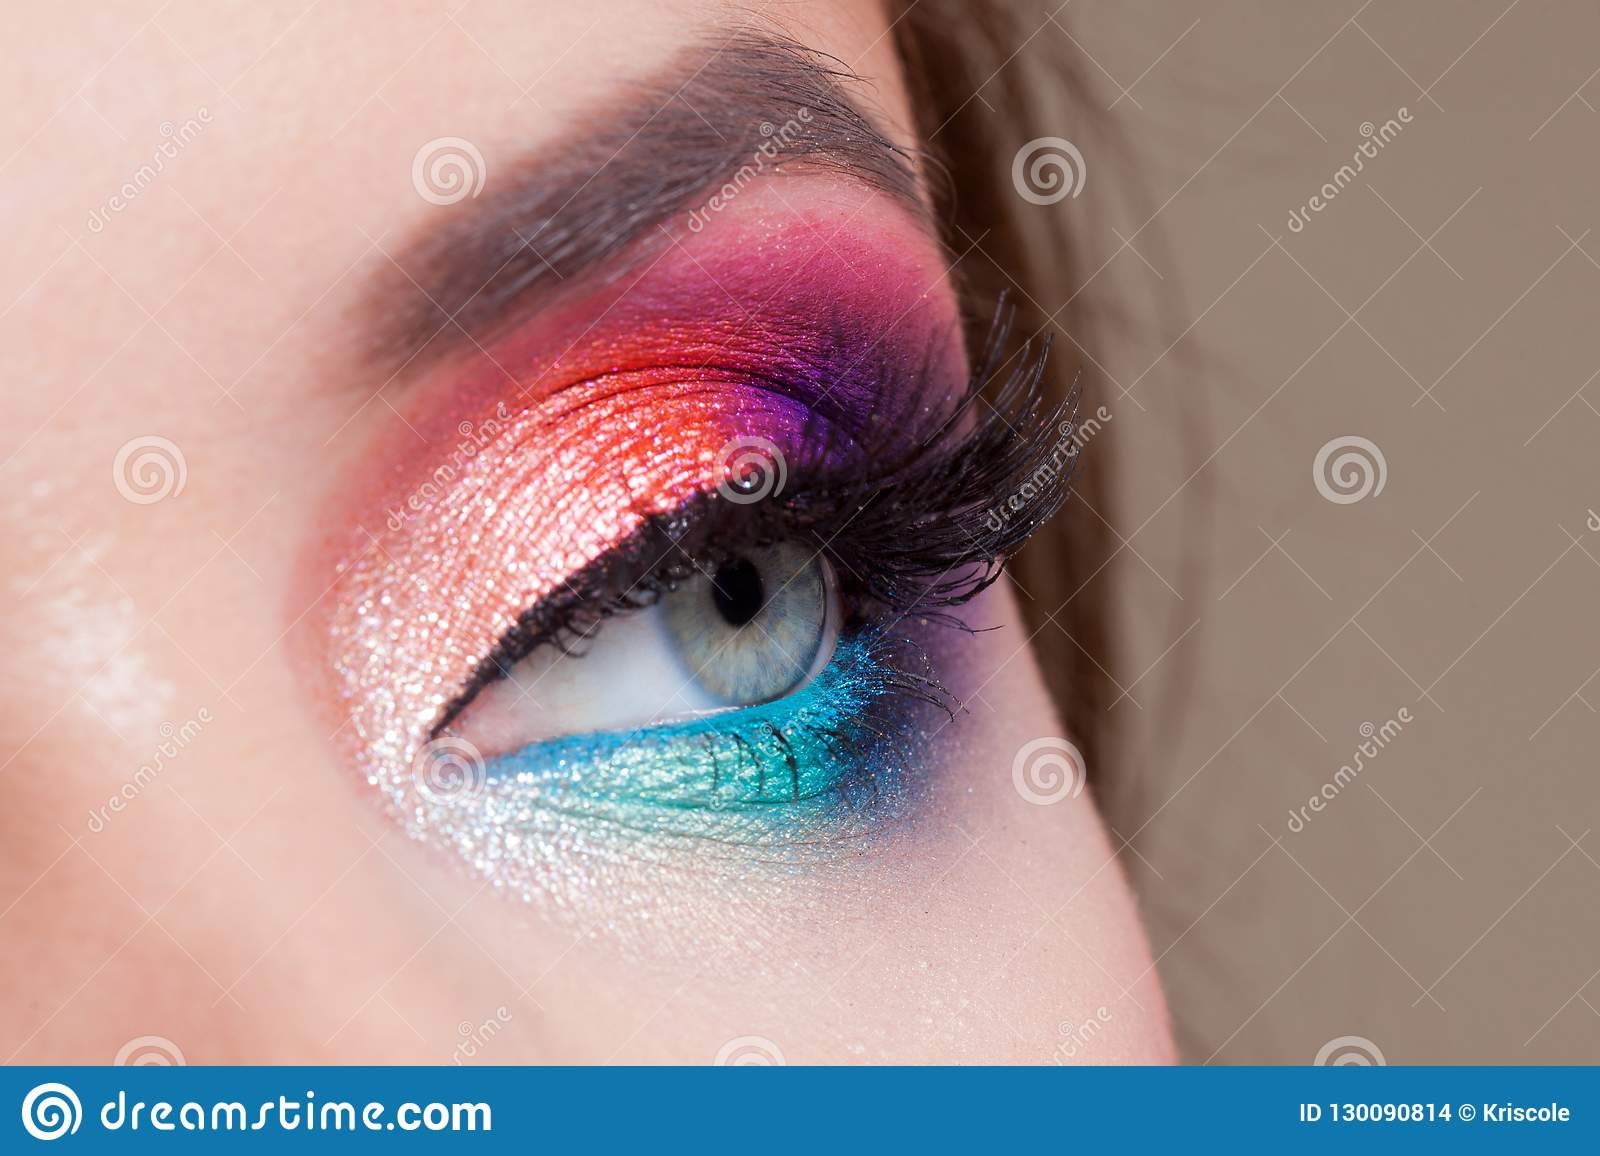 Bright Eye Makeup Bright Eye Makeup Pink And Blue Color Colored Eyeshadow Stock